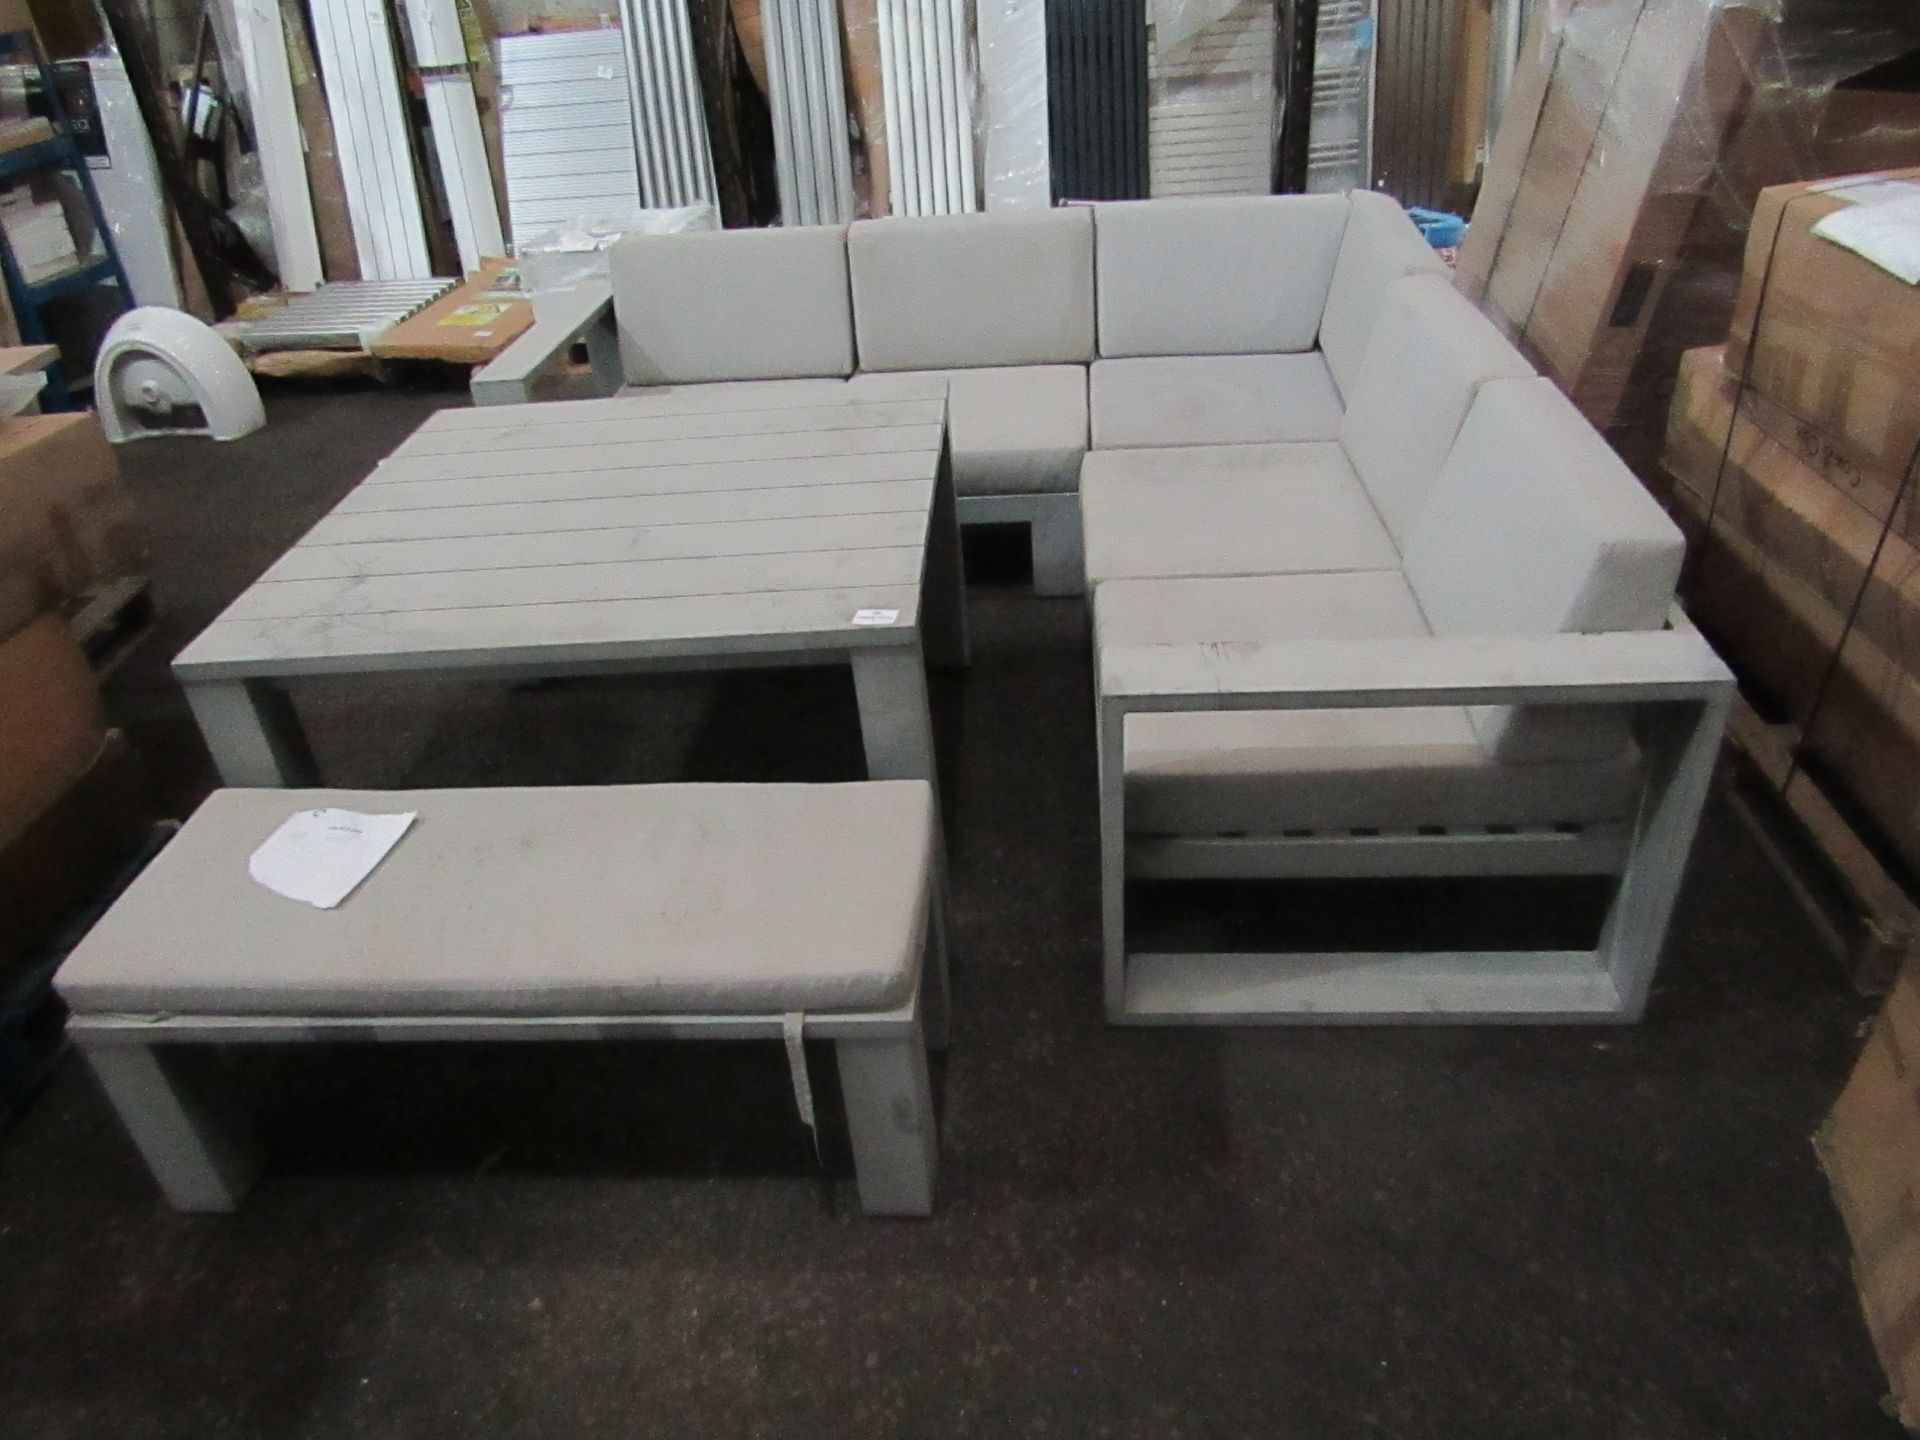 VAT 1x Cox & Cox Outdoor Corner Set - Used Condition, Repaint is suggested - RRP £-